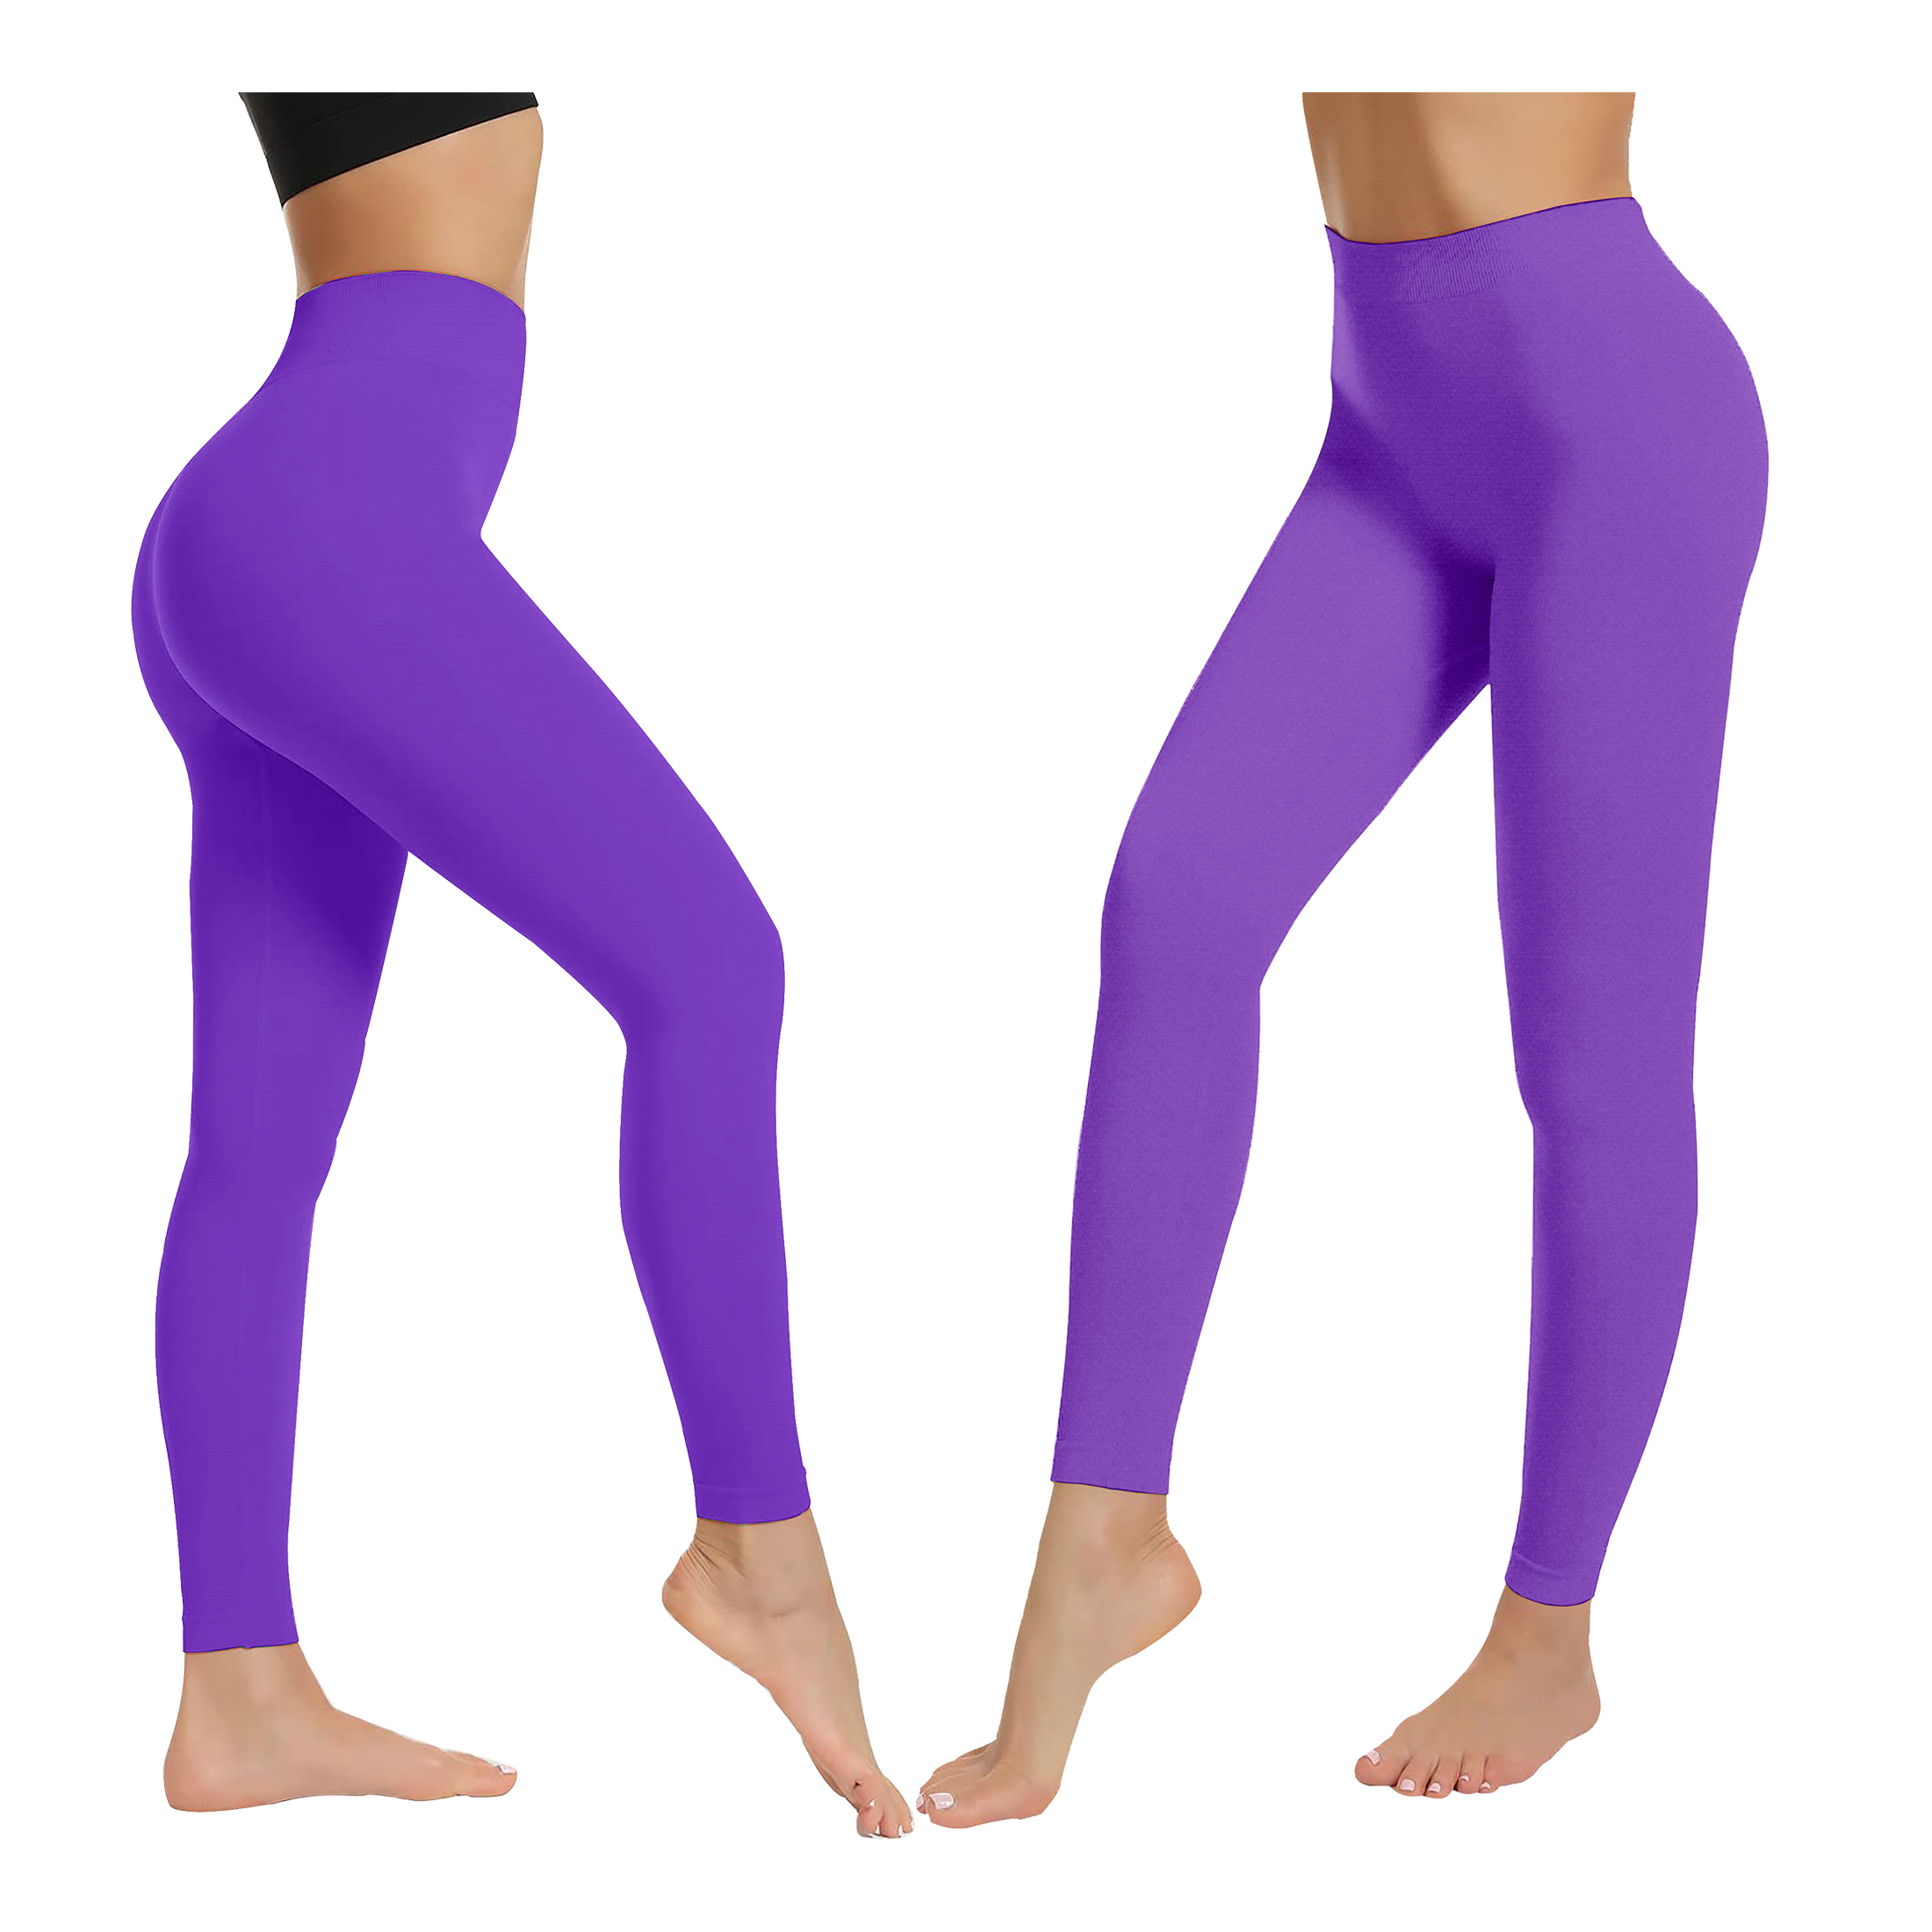 1-Pack: Women's High-Waist Ultra-Soft Stretchy Solid Fitness Yoga Leggings Pants - M